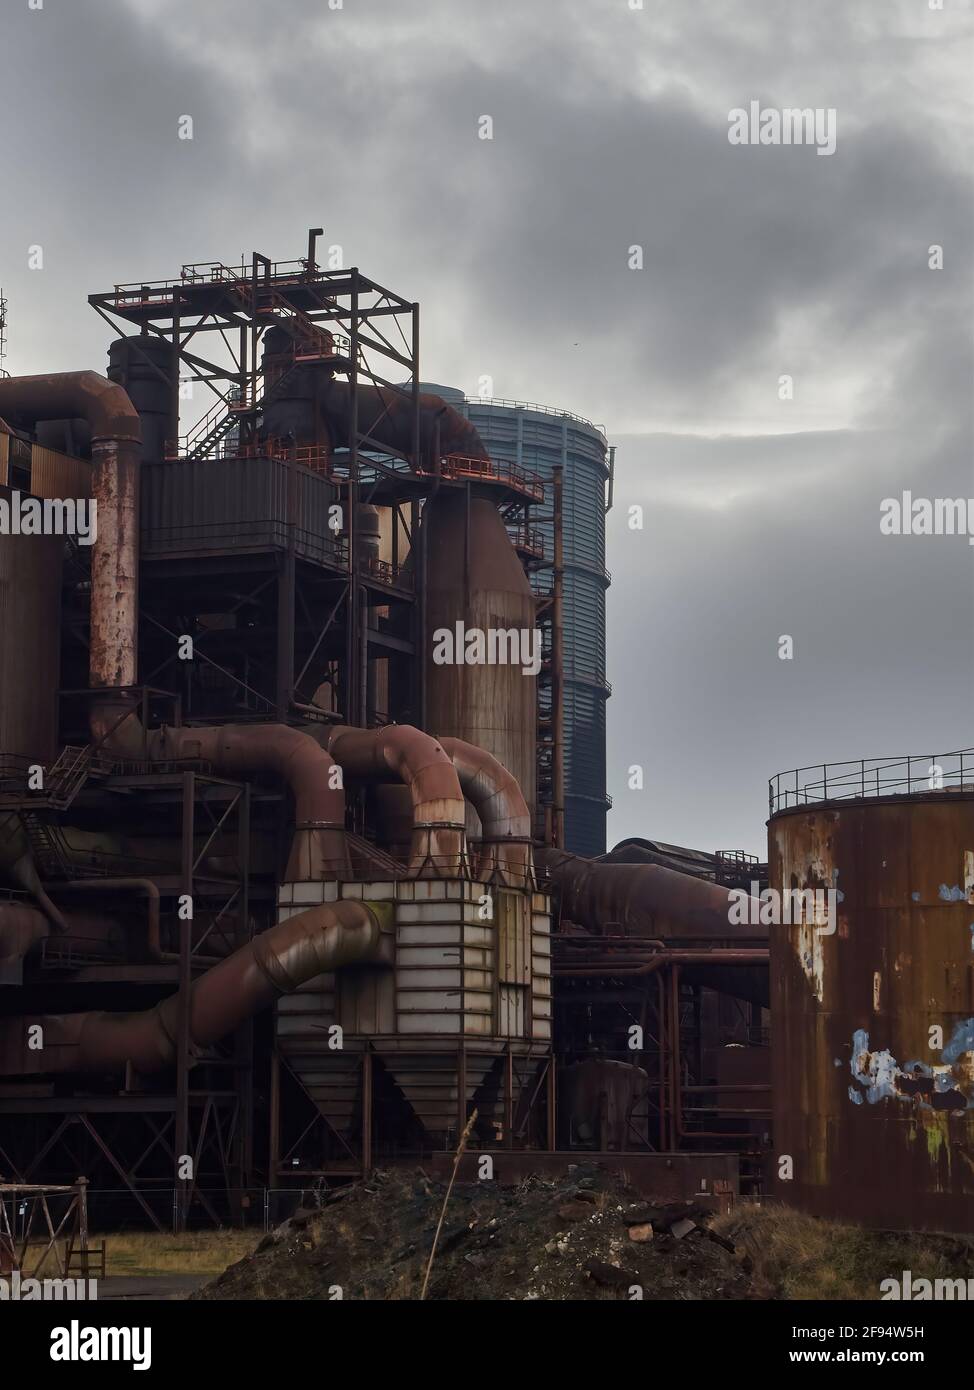 Detail from the now derelict Redcar Steelworks, showing a section of the blast furnace complex - huge rusted pipes and webs of support structures. Stock Photo